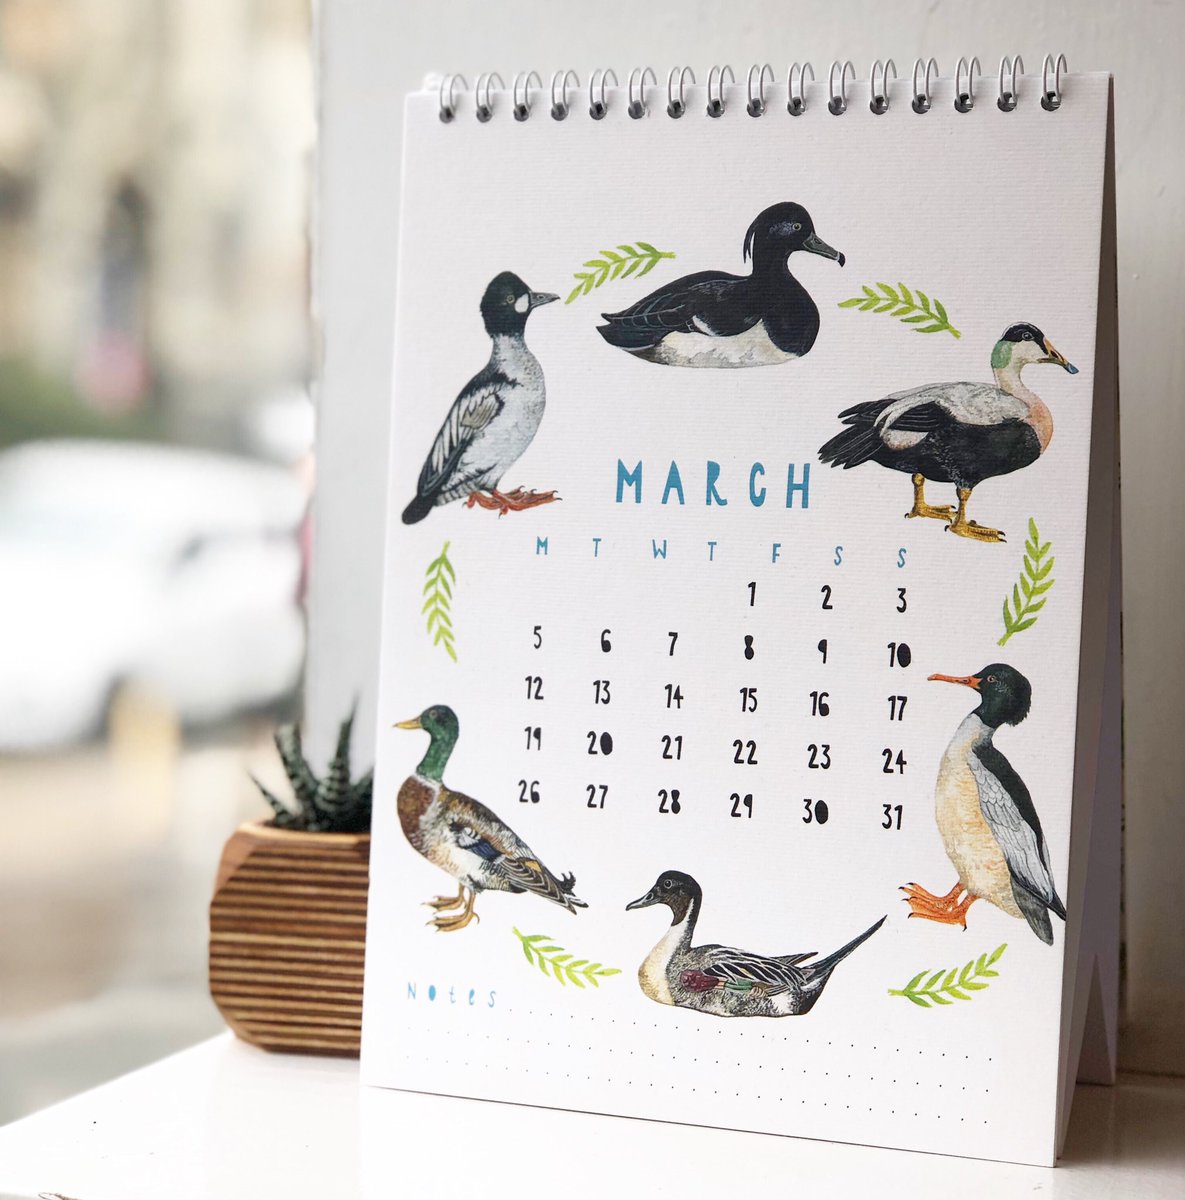 Sort your life out and get organised with this awesome desk #Calendar by @EllieLonghurst (Yes, it’s the 1st of March already)...